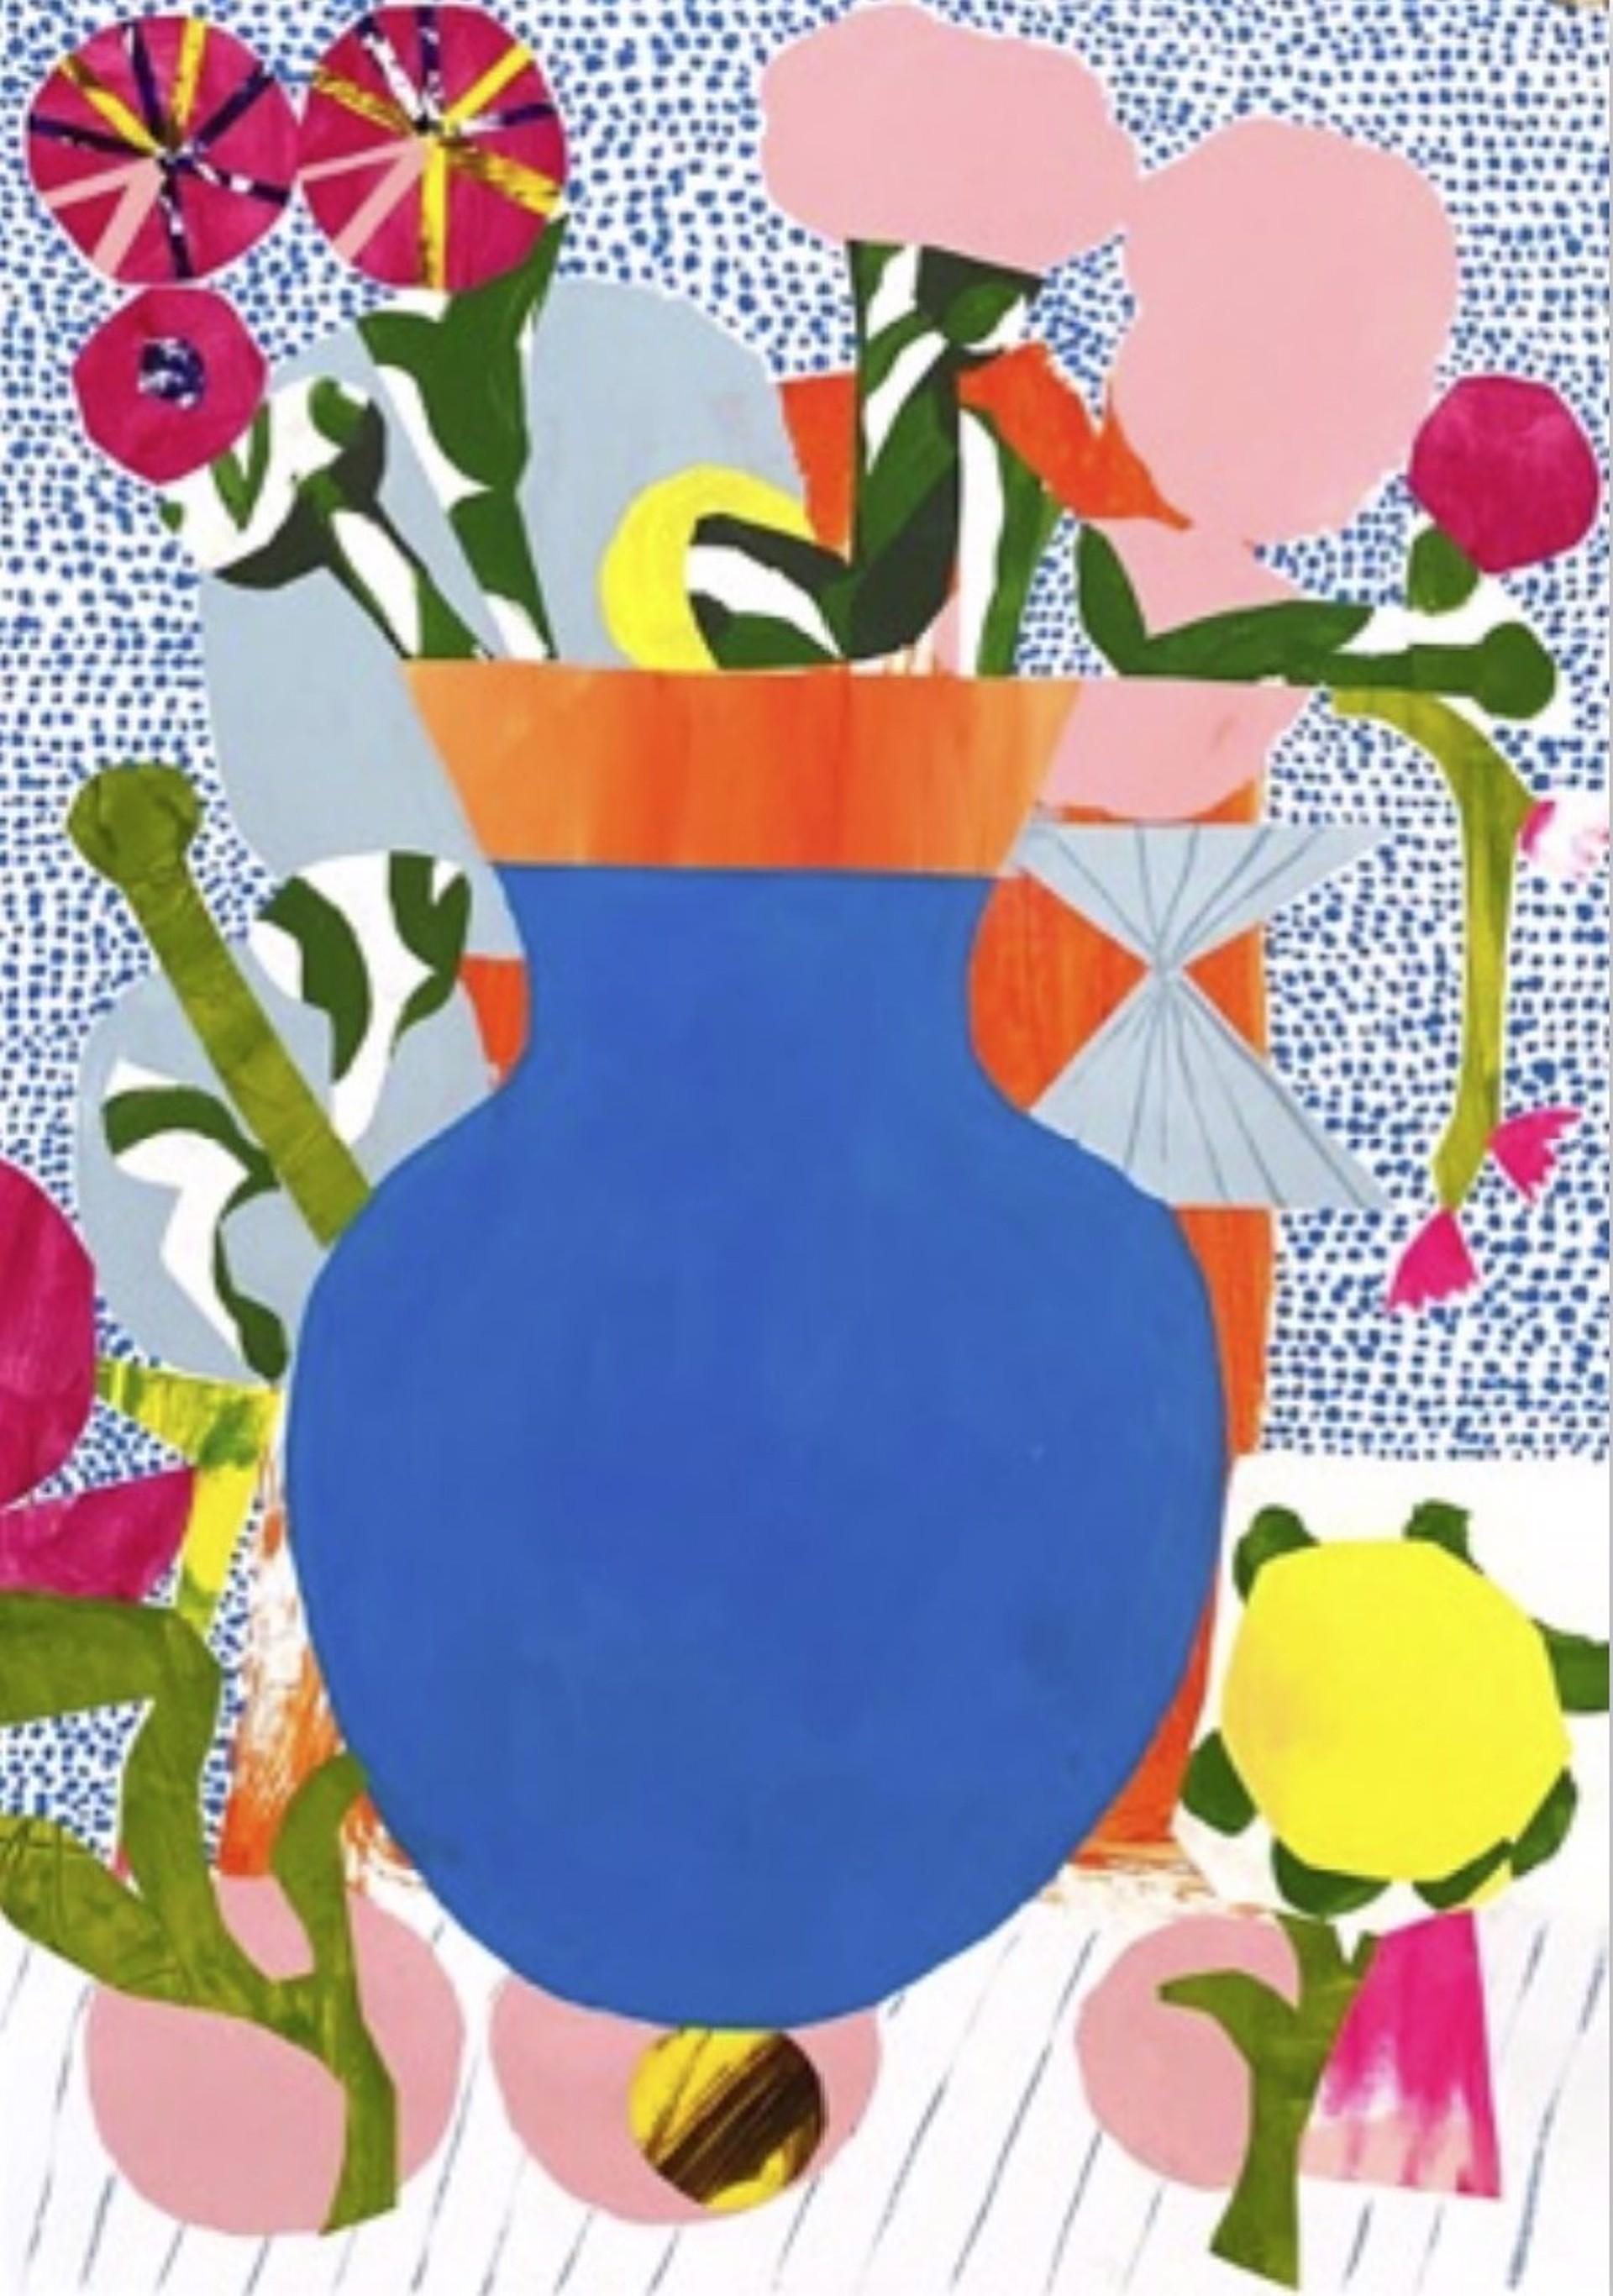 Maria Lundstrom Abstract Painting - Vase & Flowers II, acrylic on paper, botanicals, florals, color, abstract shapes